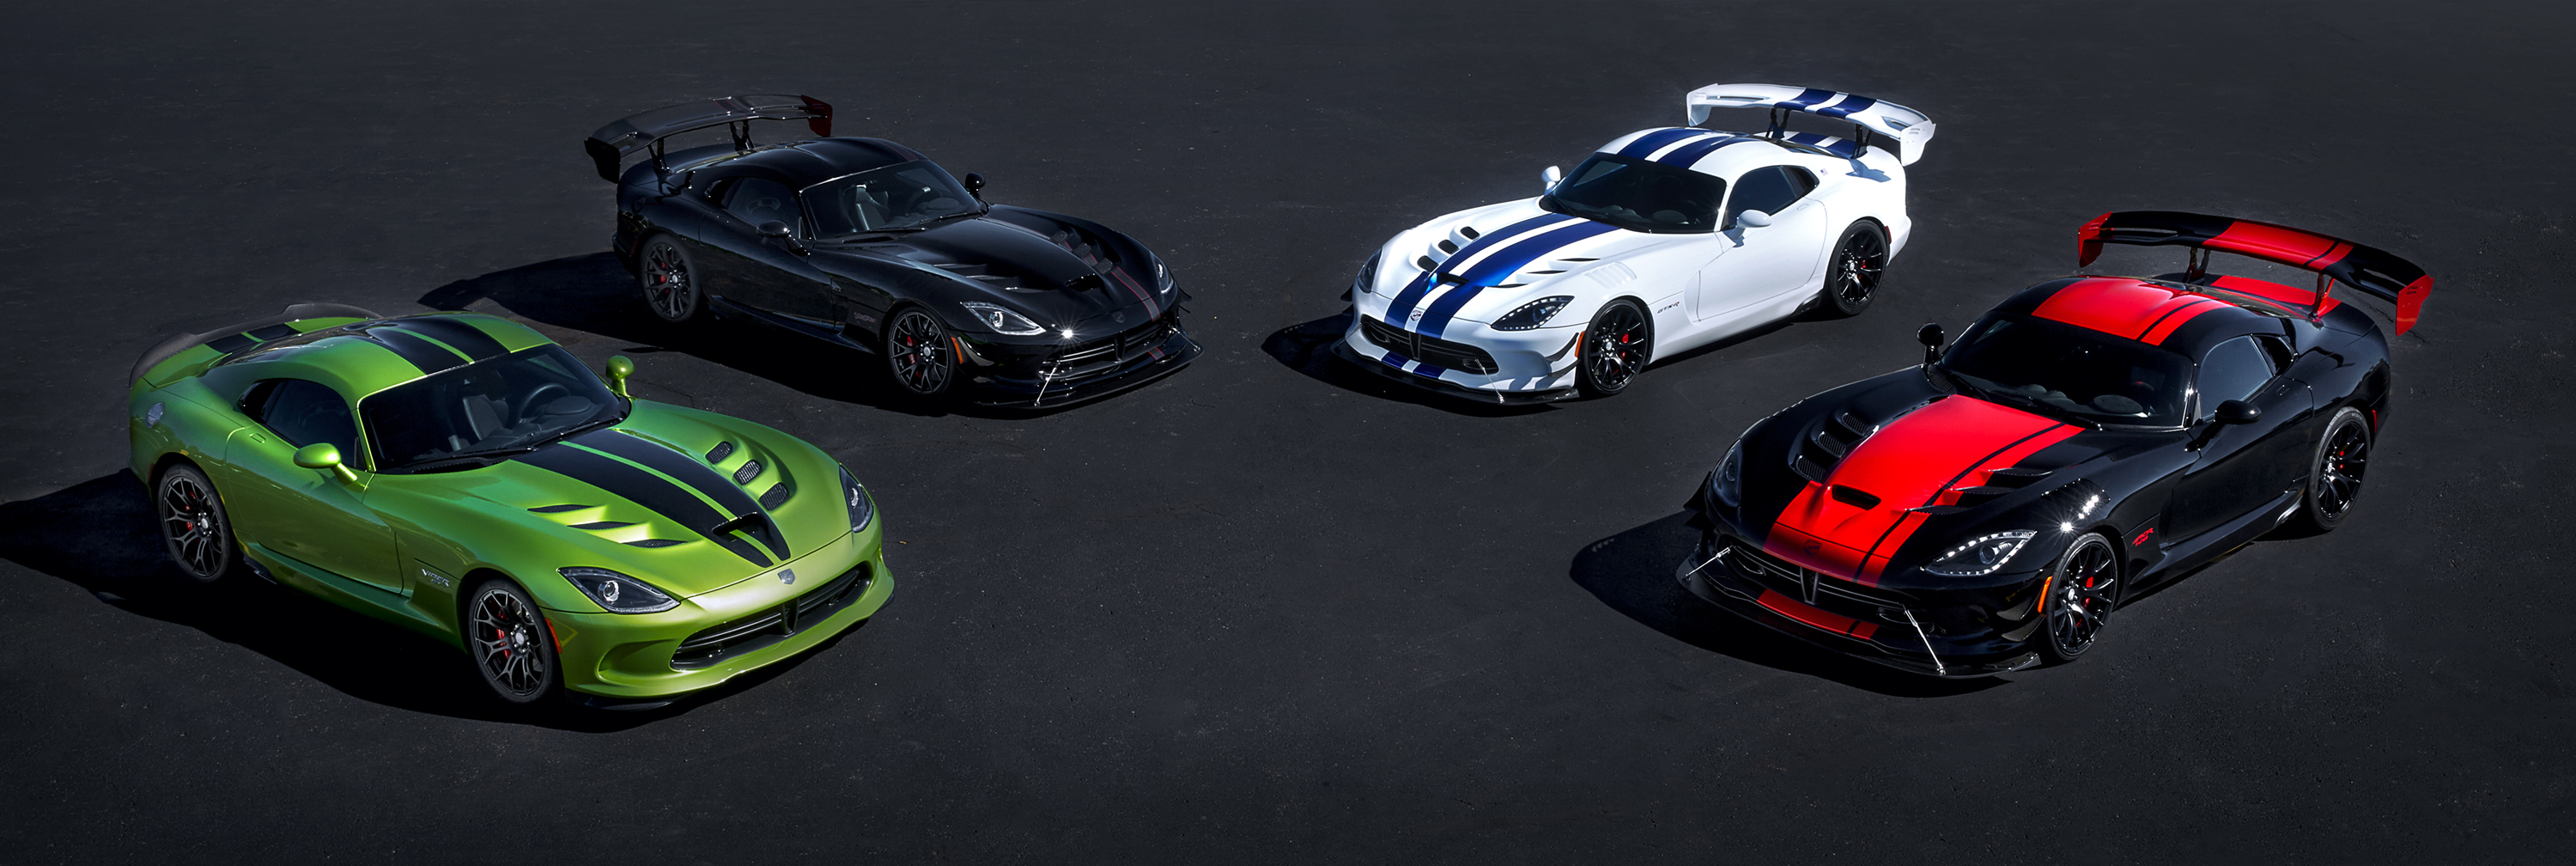 Dodge Celebrates 25 Years of the Viper